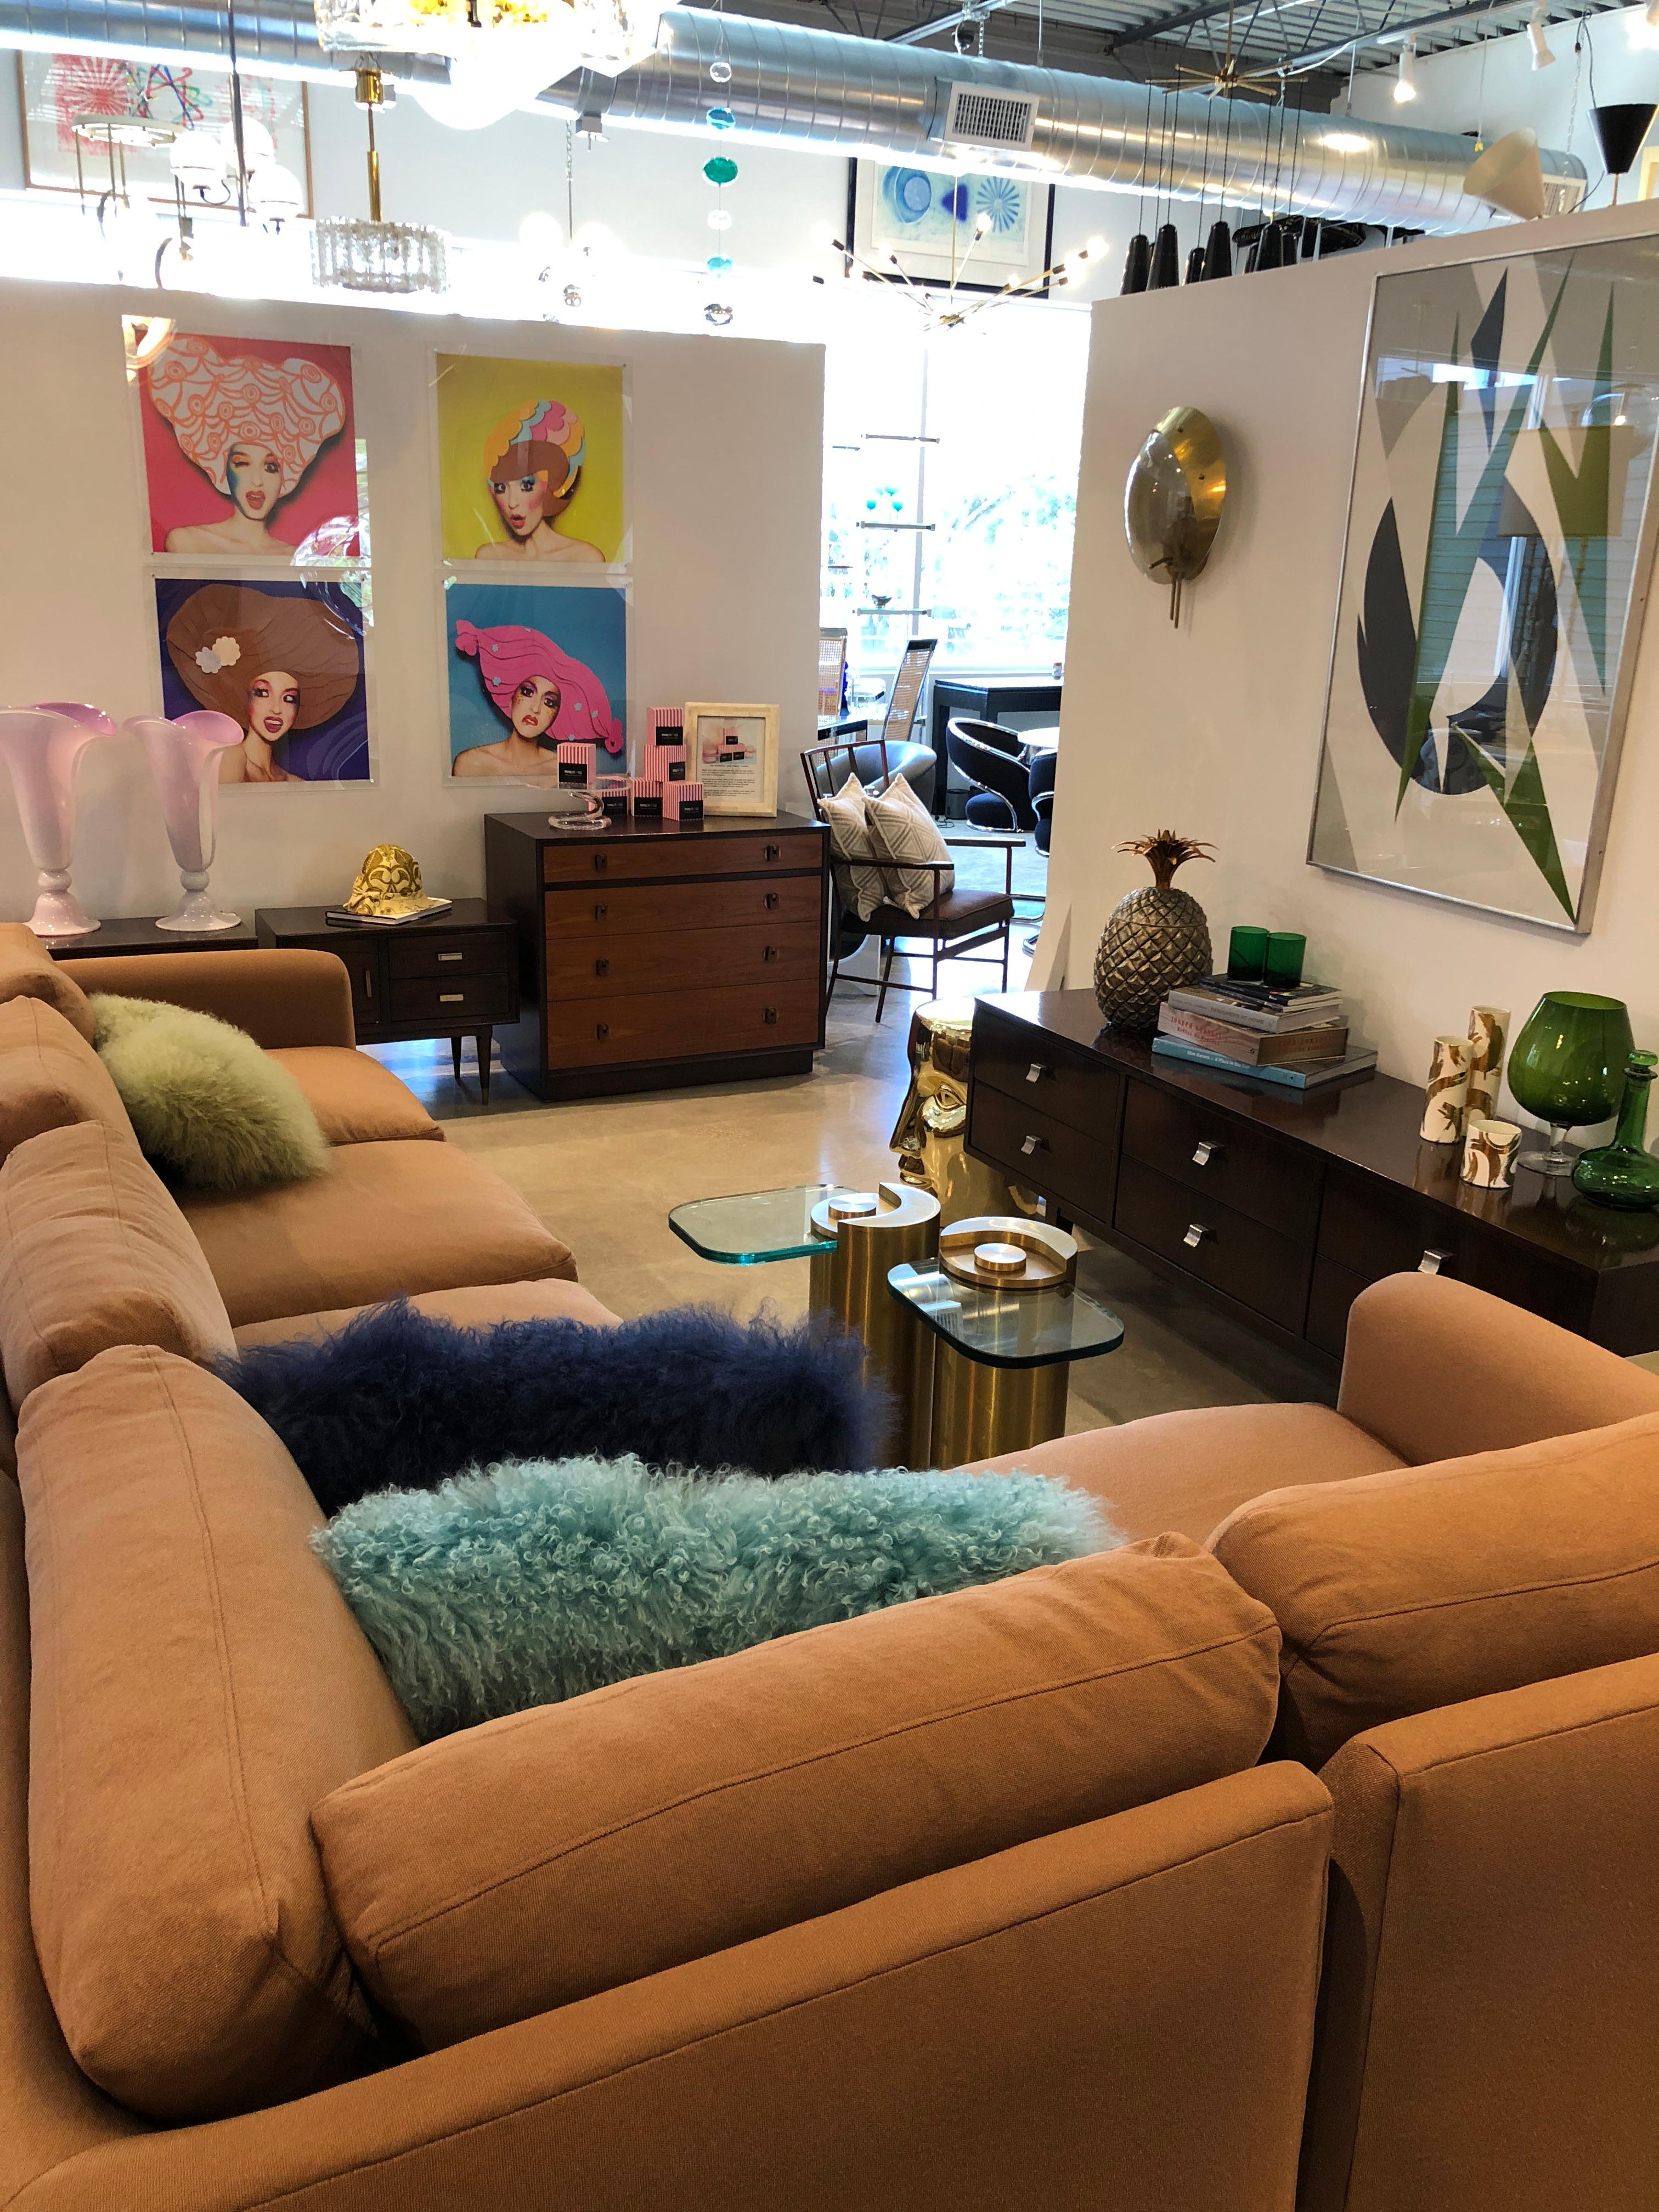 Offered is a newly upholstered in Knoll fabric a mid century modern Milo Baughman style sectional sofa by Thayer Goggin.  Just back from our upholstery shop, this smaller scale five-piece sectional sofa, in the style of Milo Baughman and produced by